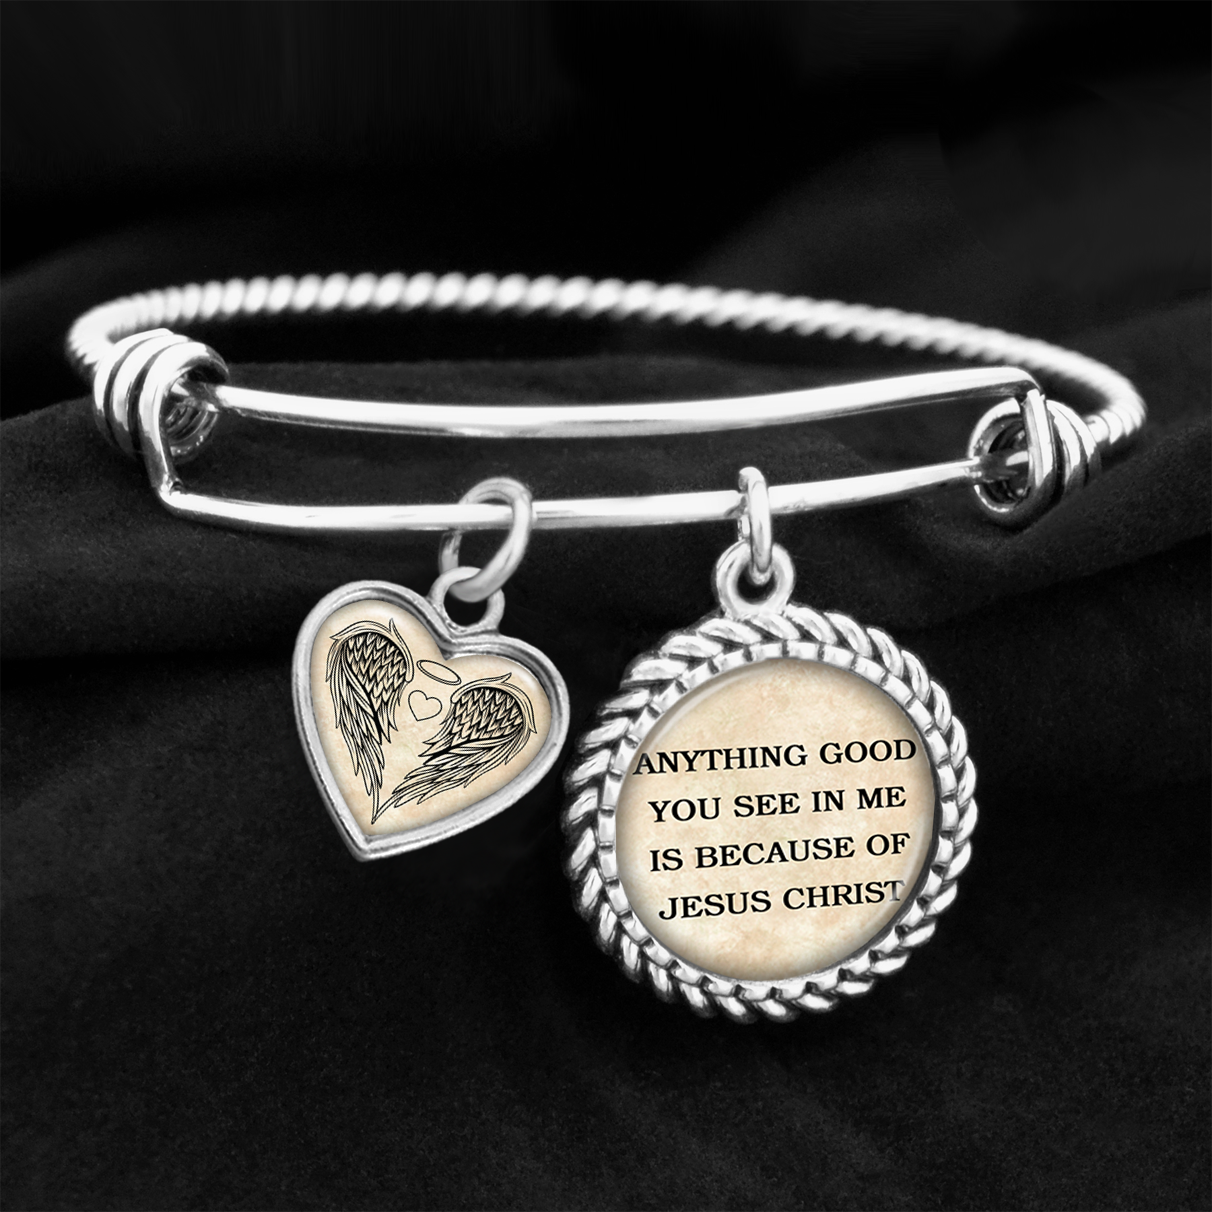 Anything Good You See In Me Is Because Of Jesus Christ Charm Bracelet